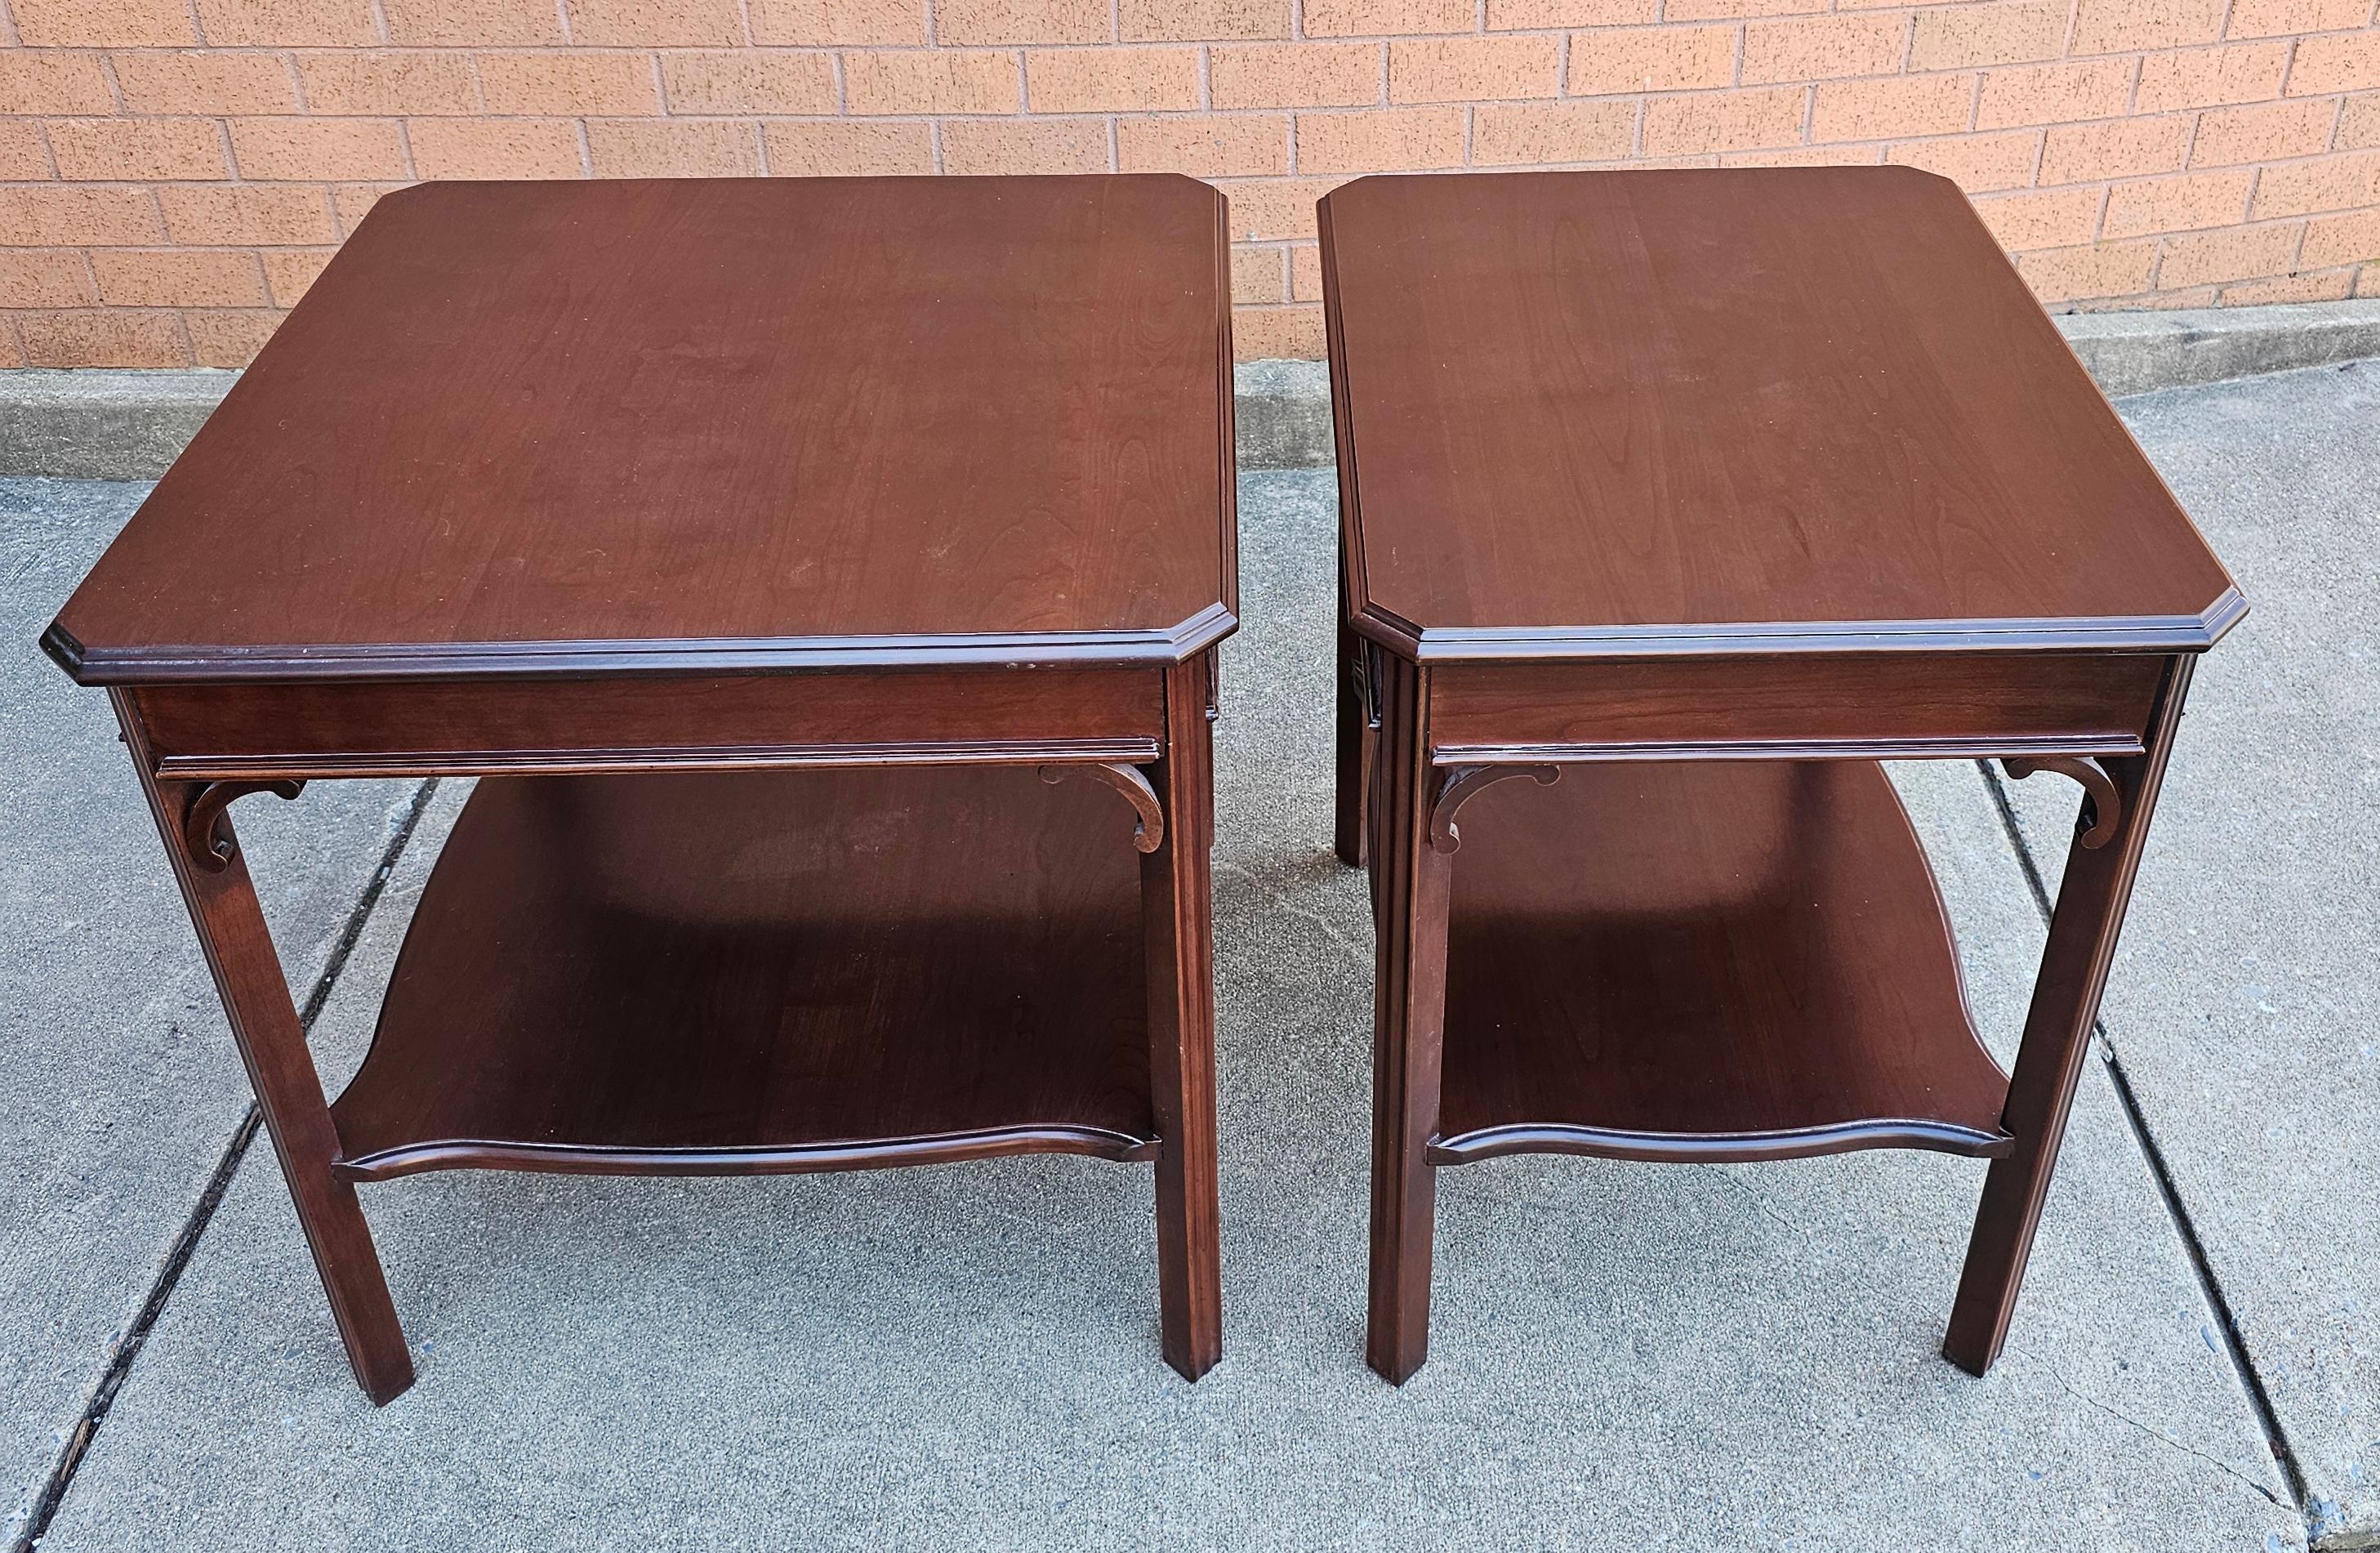 A gorgeous pair of  Harden Furniture Chippendale Solid Cherry two Tier Side Tables with Protective Glass Tops in pristine condition. 2004 vintage in Like new condition.
Larger table measures 26